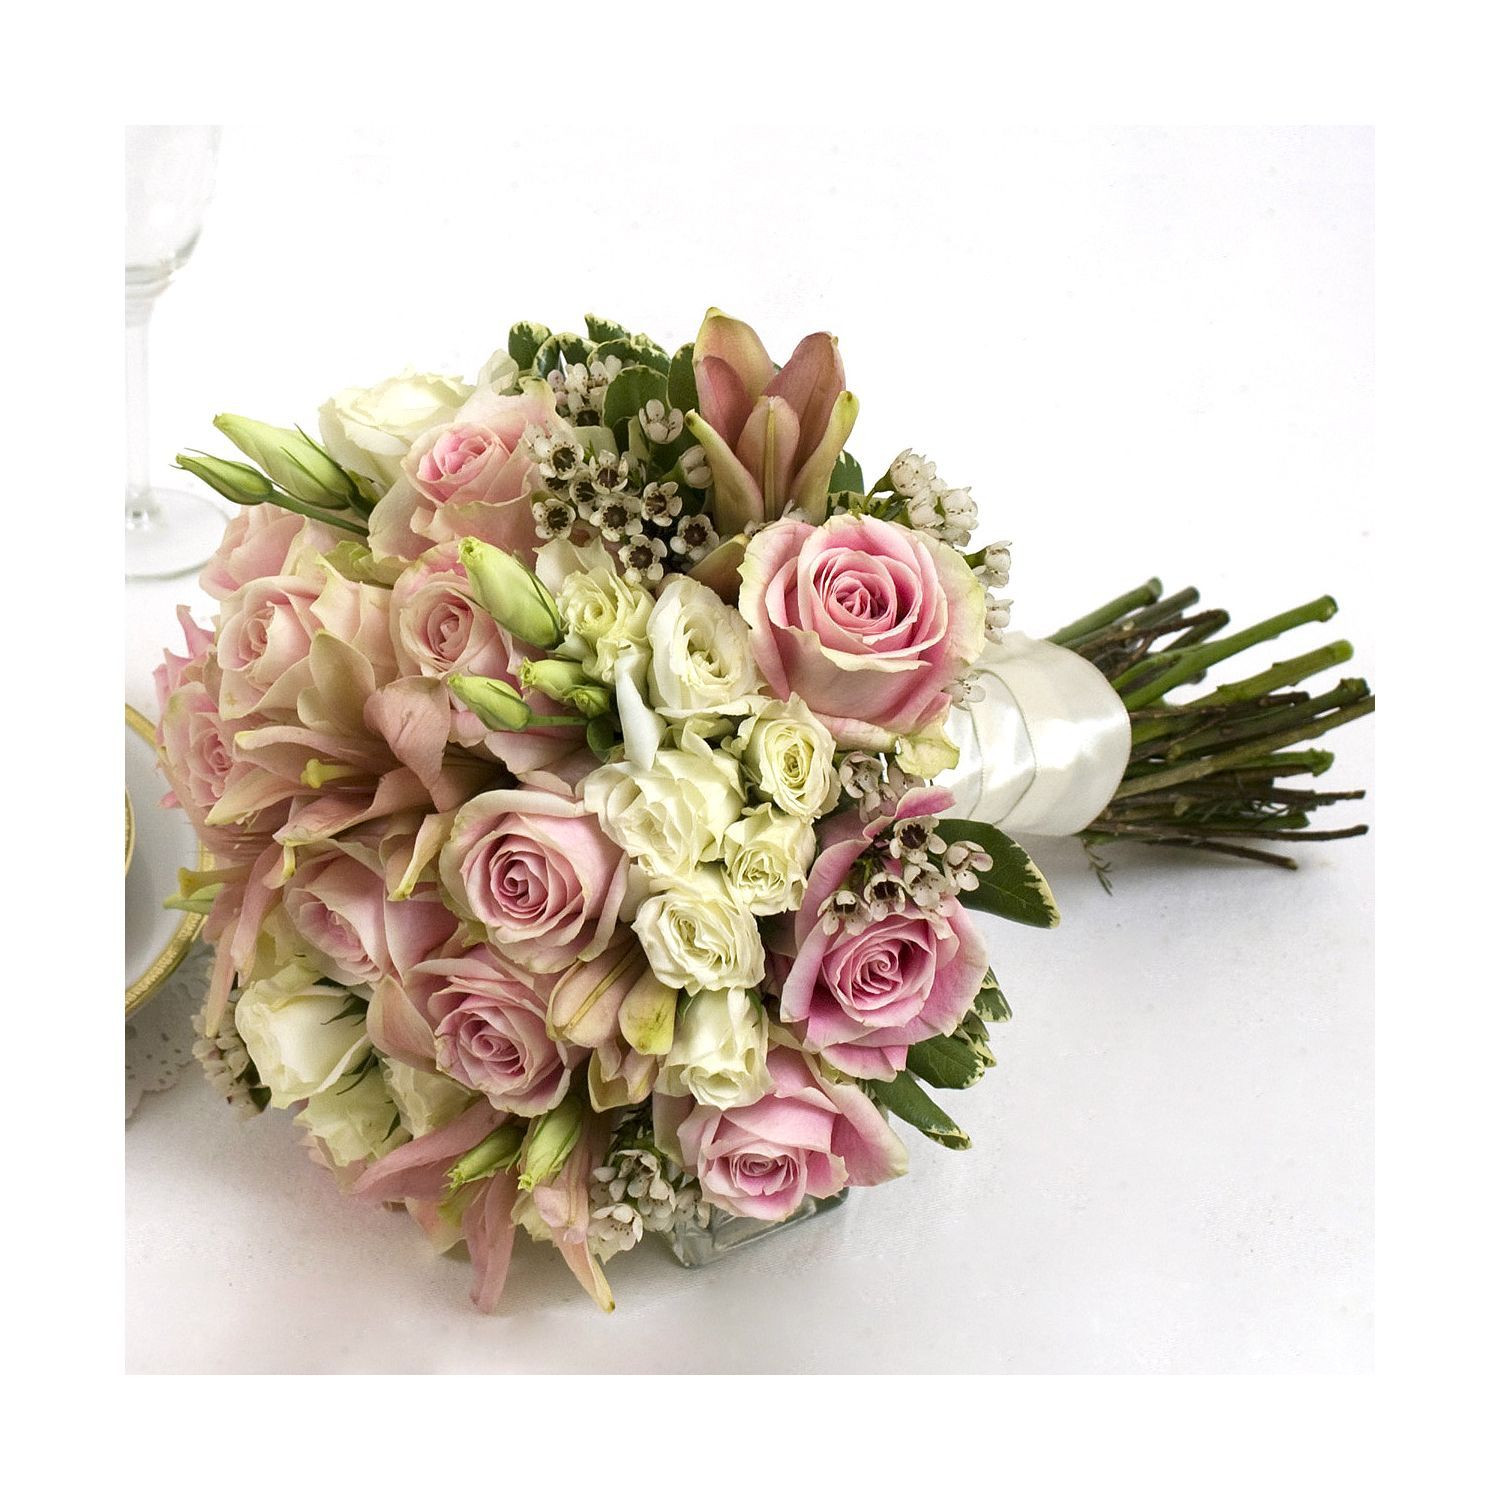 Sams Club Wedding Flowers
 Thoughts feelings Wedding Collection Pink 17 pc